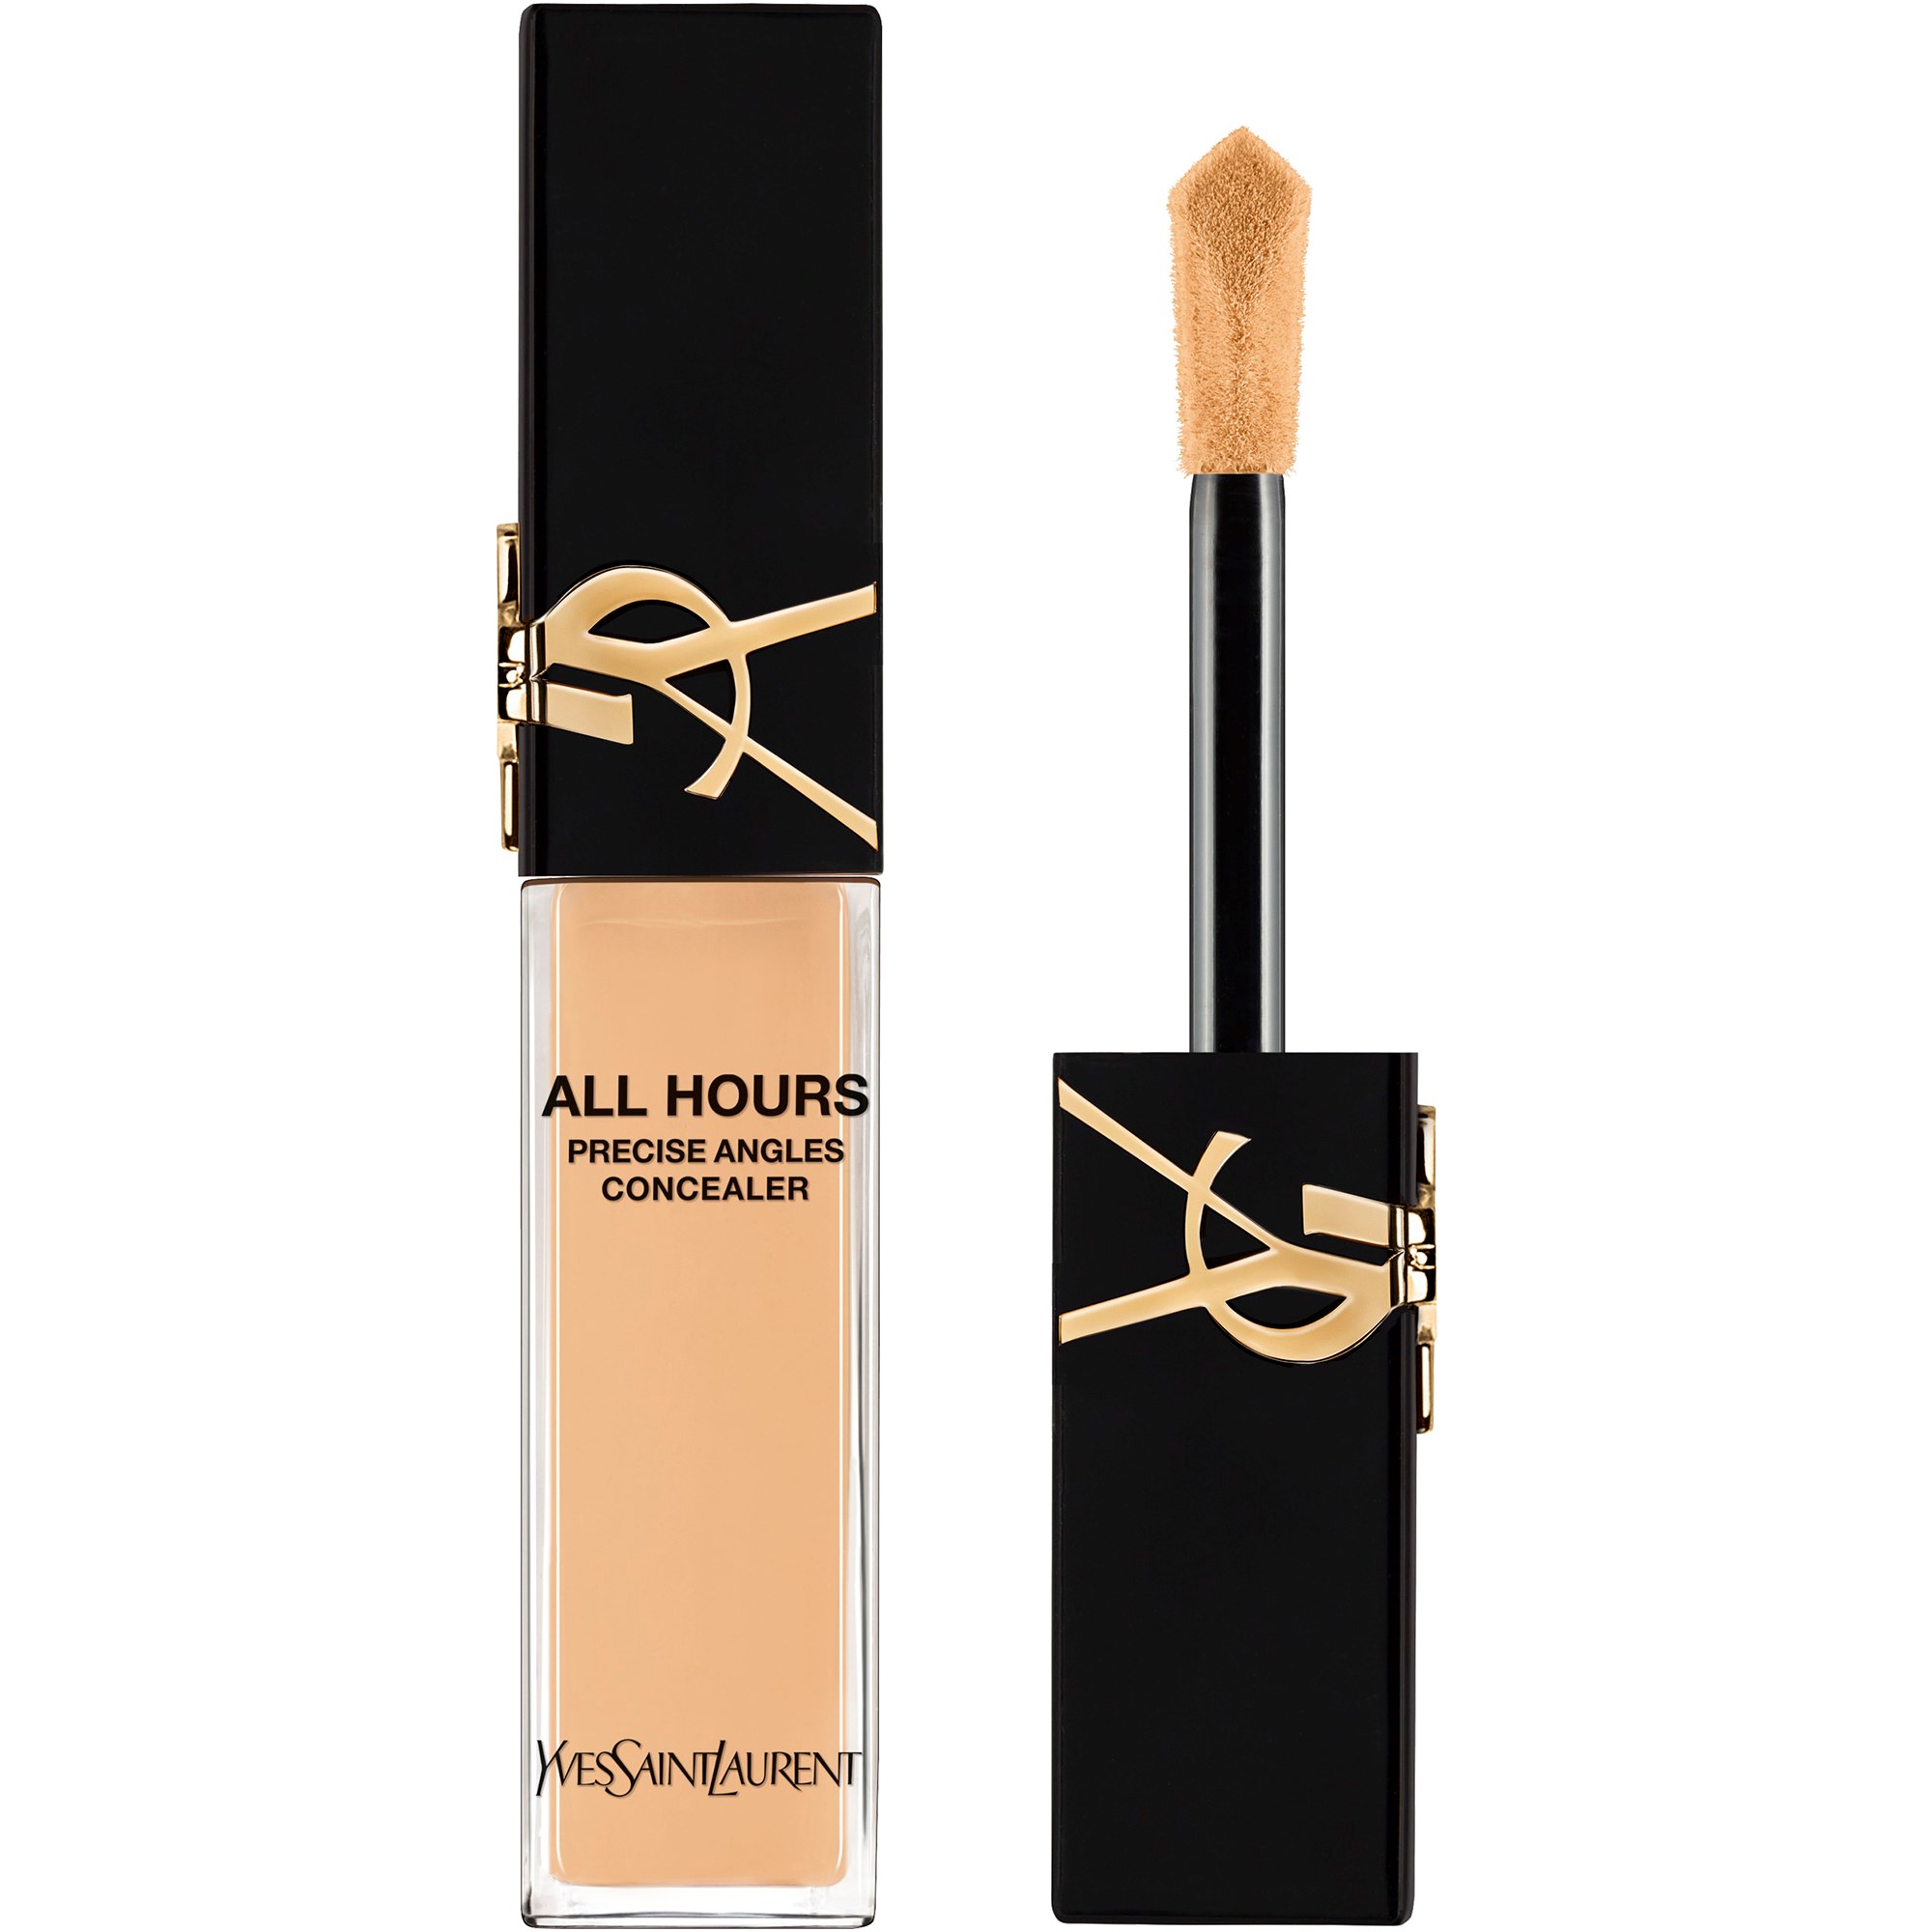 Yves Saint Laurent All Hours Precise Angles Concealer LN1